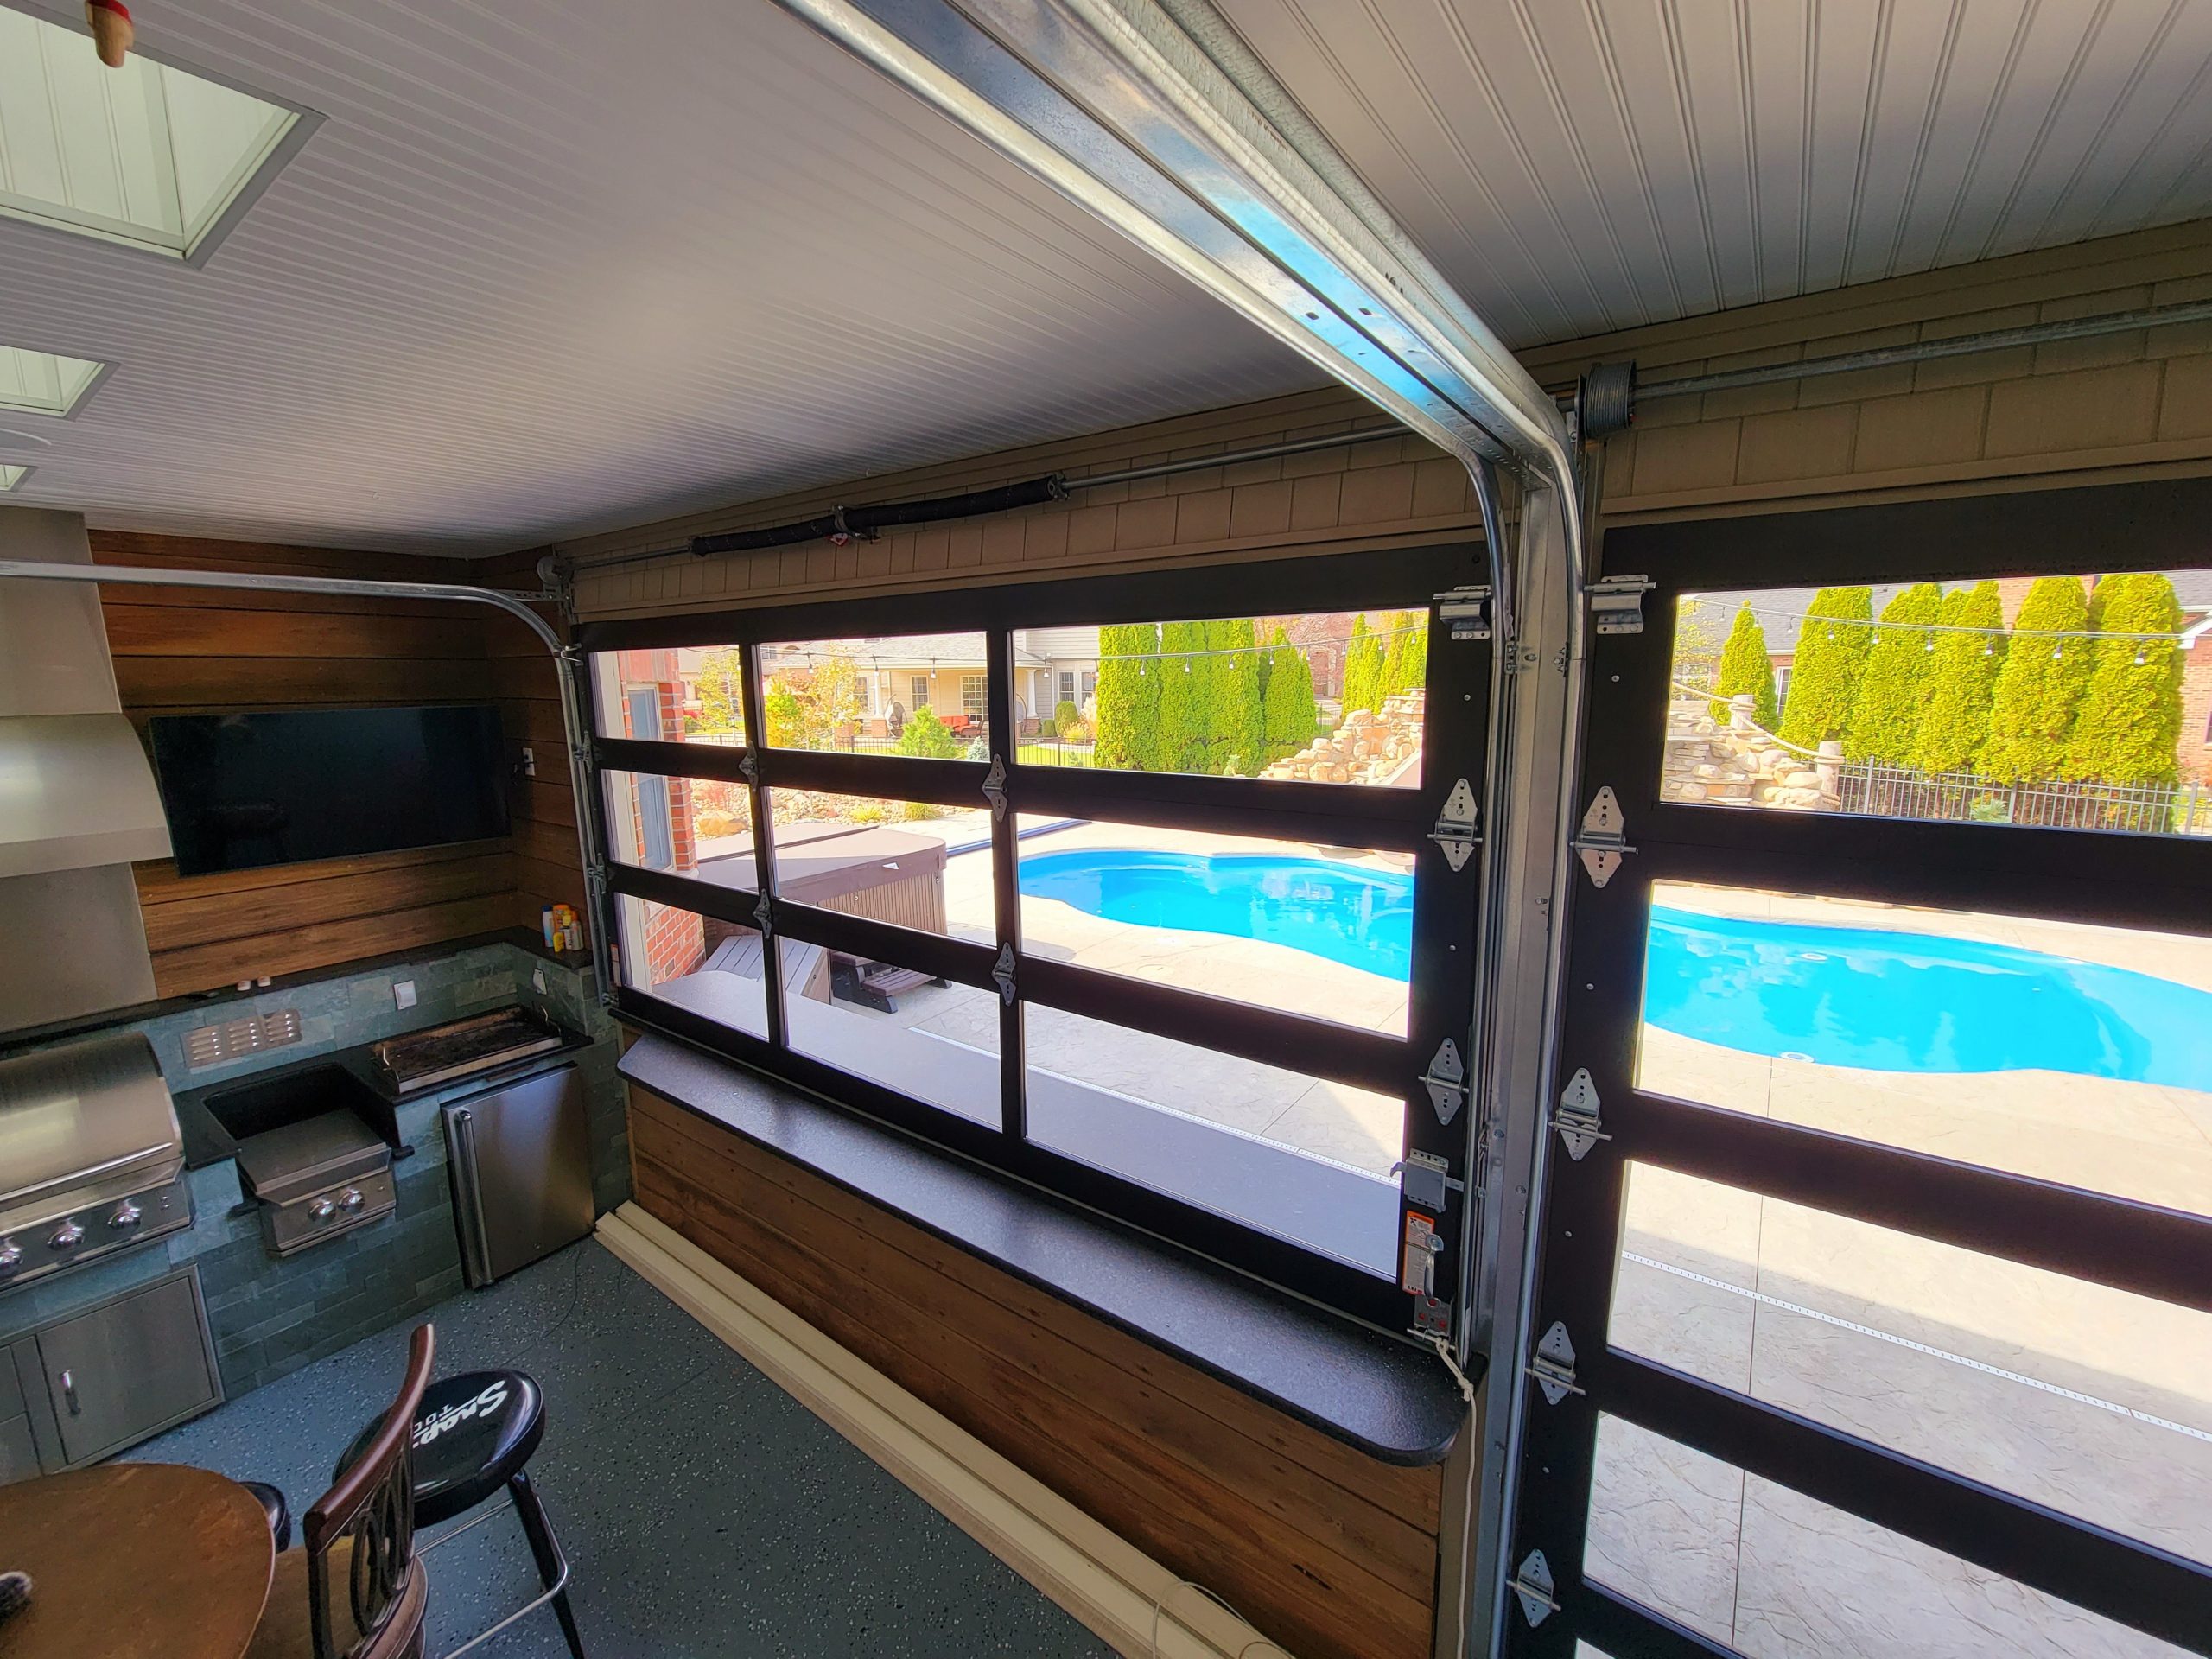 Pool house roll up doors